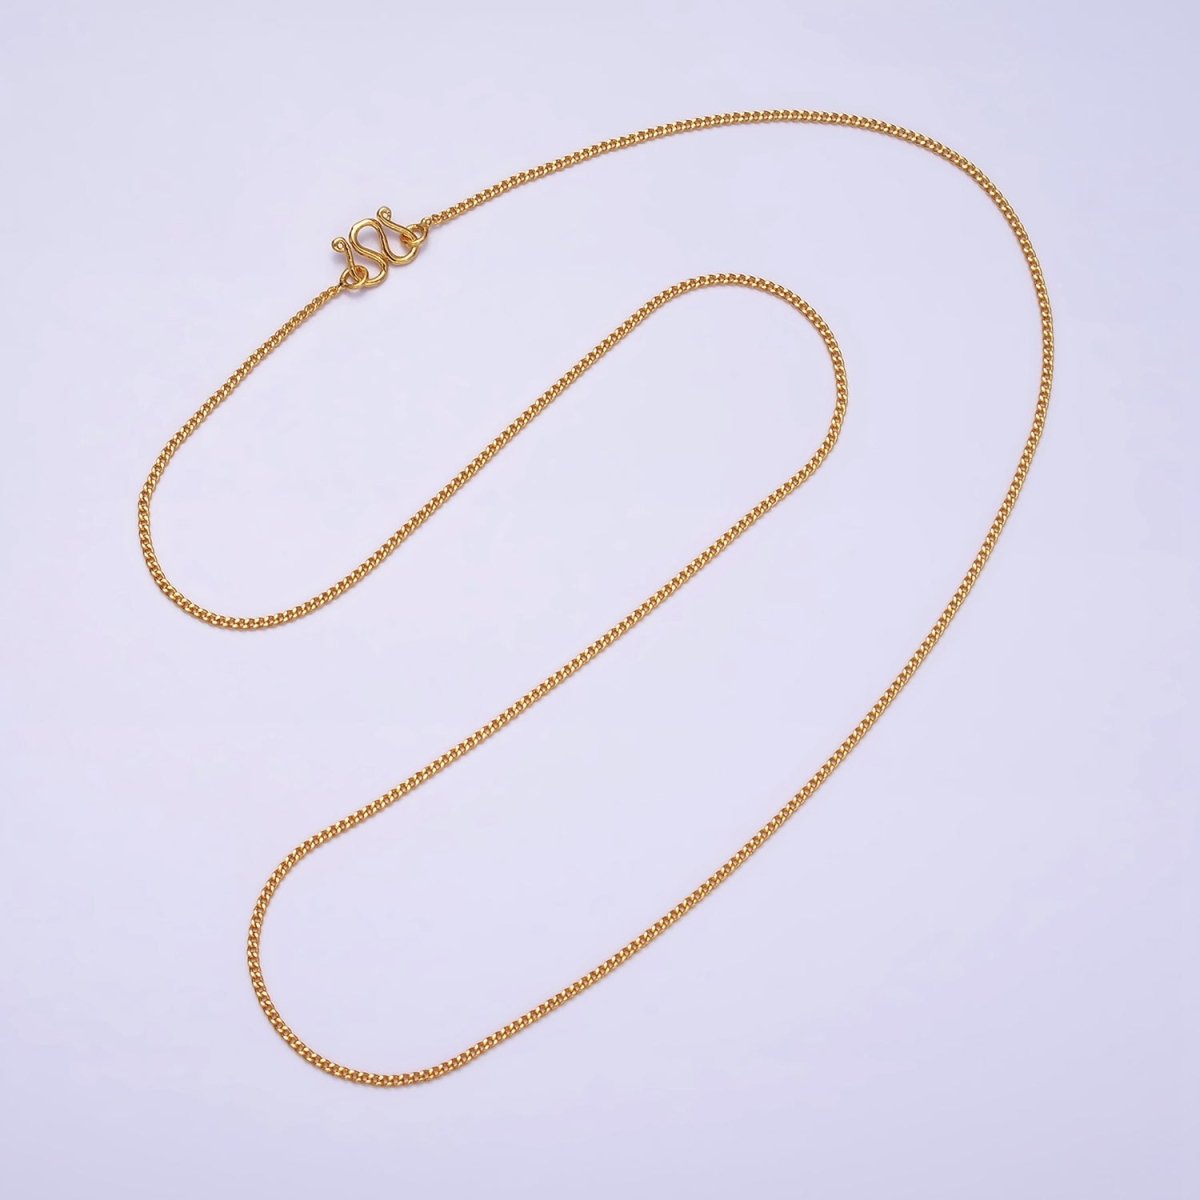 24K Gold Filled 1mm Cuban Curb 17.25 Inch Layering Chain Necklace w. Lobster Clasps, S-Hook Clasps Closure | WA-1882 WA-1883 Clearance Pricing - DLUXCA